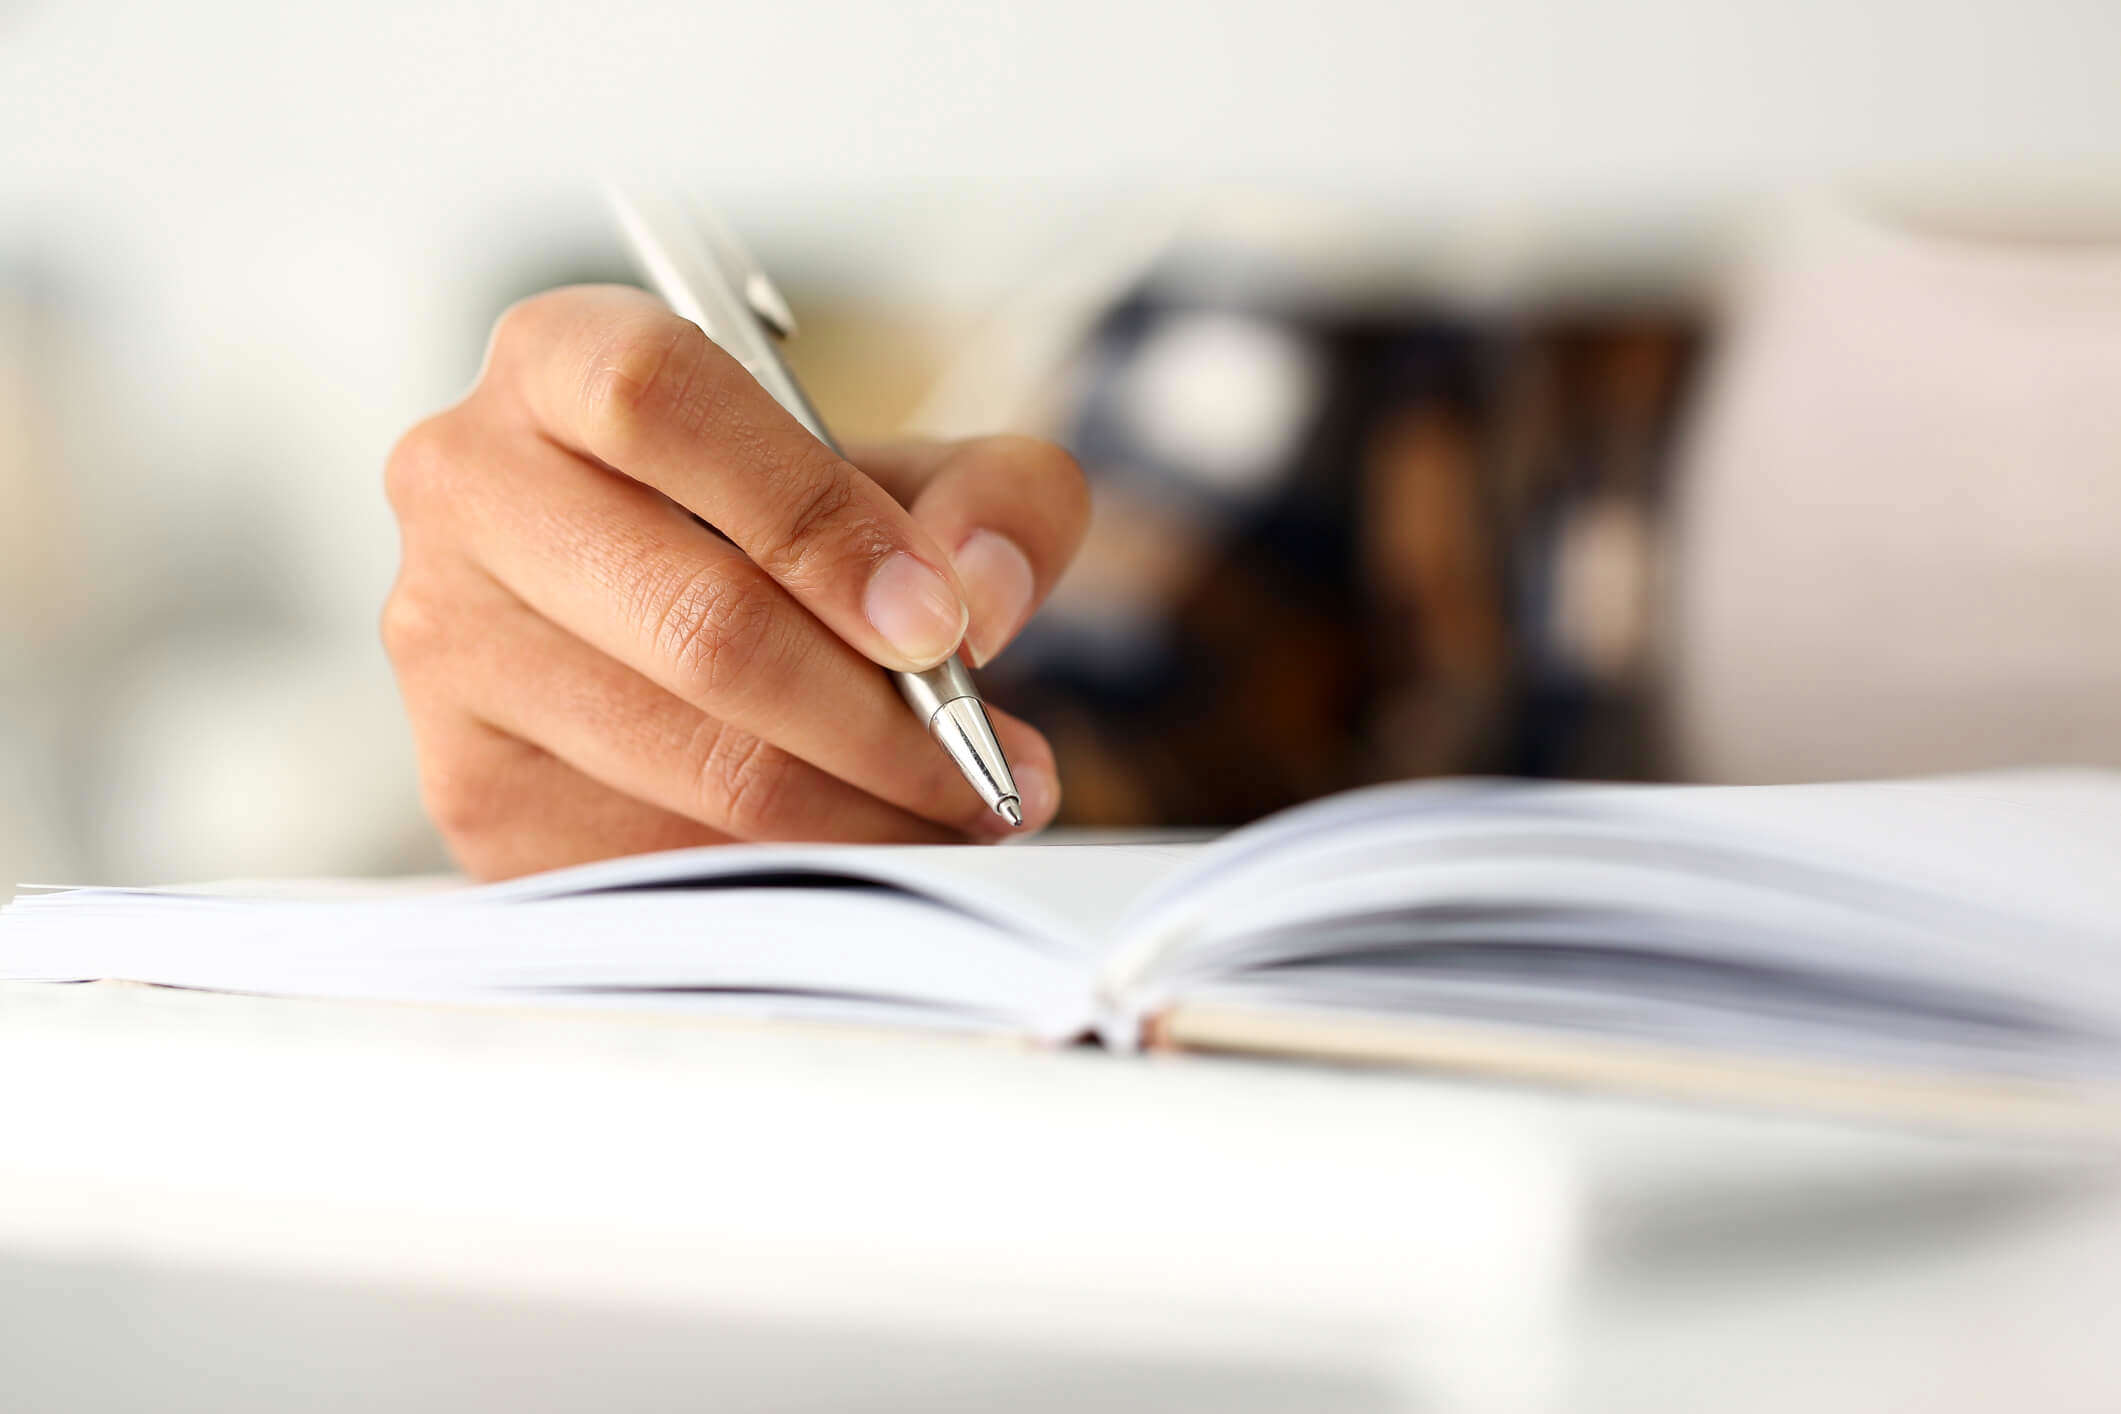 a close up of someone holding a pen and writing in a journal